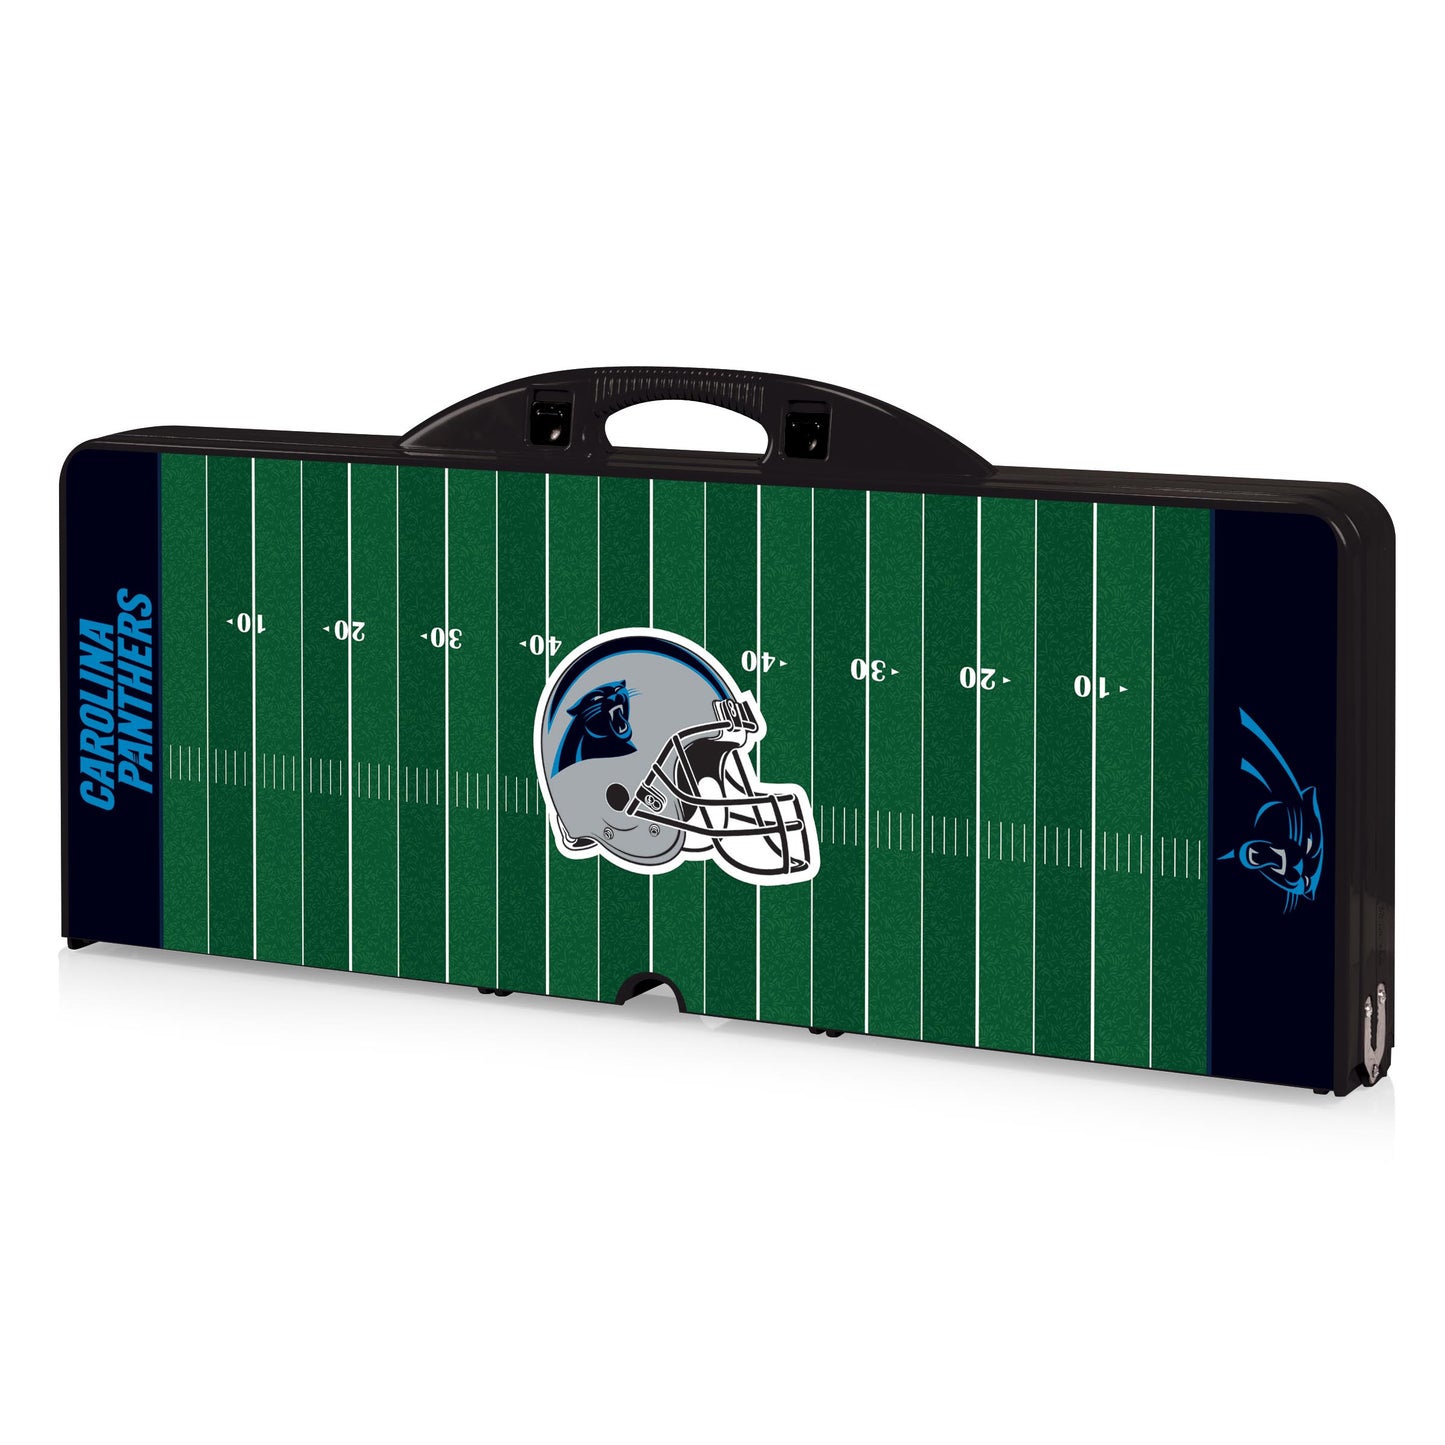 Carolina Panthers - Picnic Table Portable Folding Table with Seats - Football Field Style